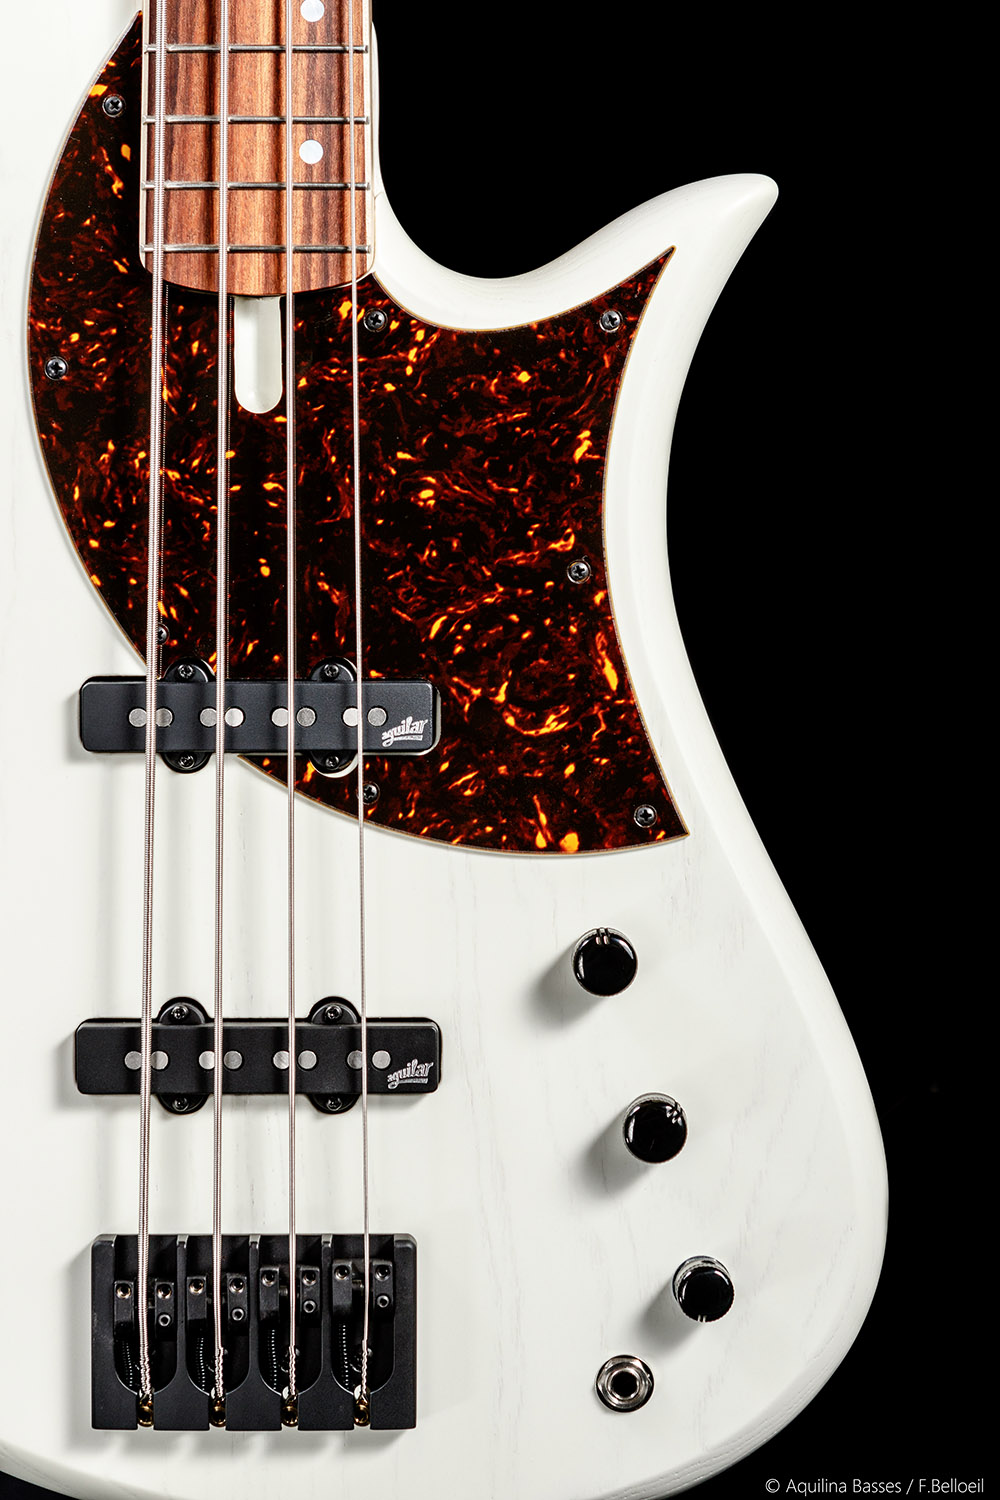 Aquilina Sirius 4 Standard Rw - White - Basse Électrique Solid Body - Variation 5